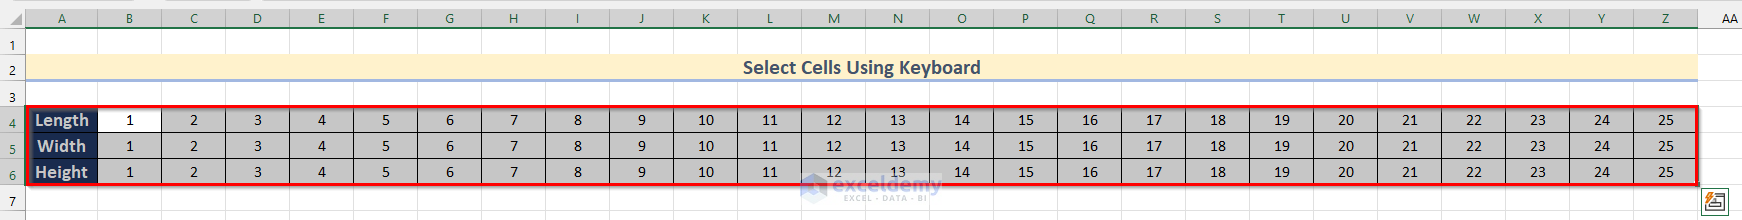 2. Select Cells